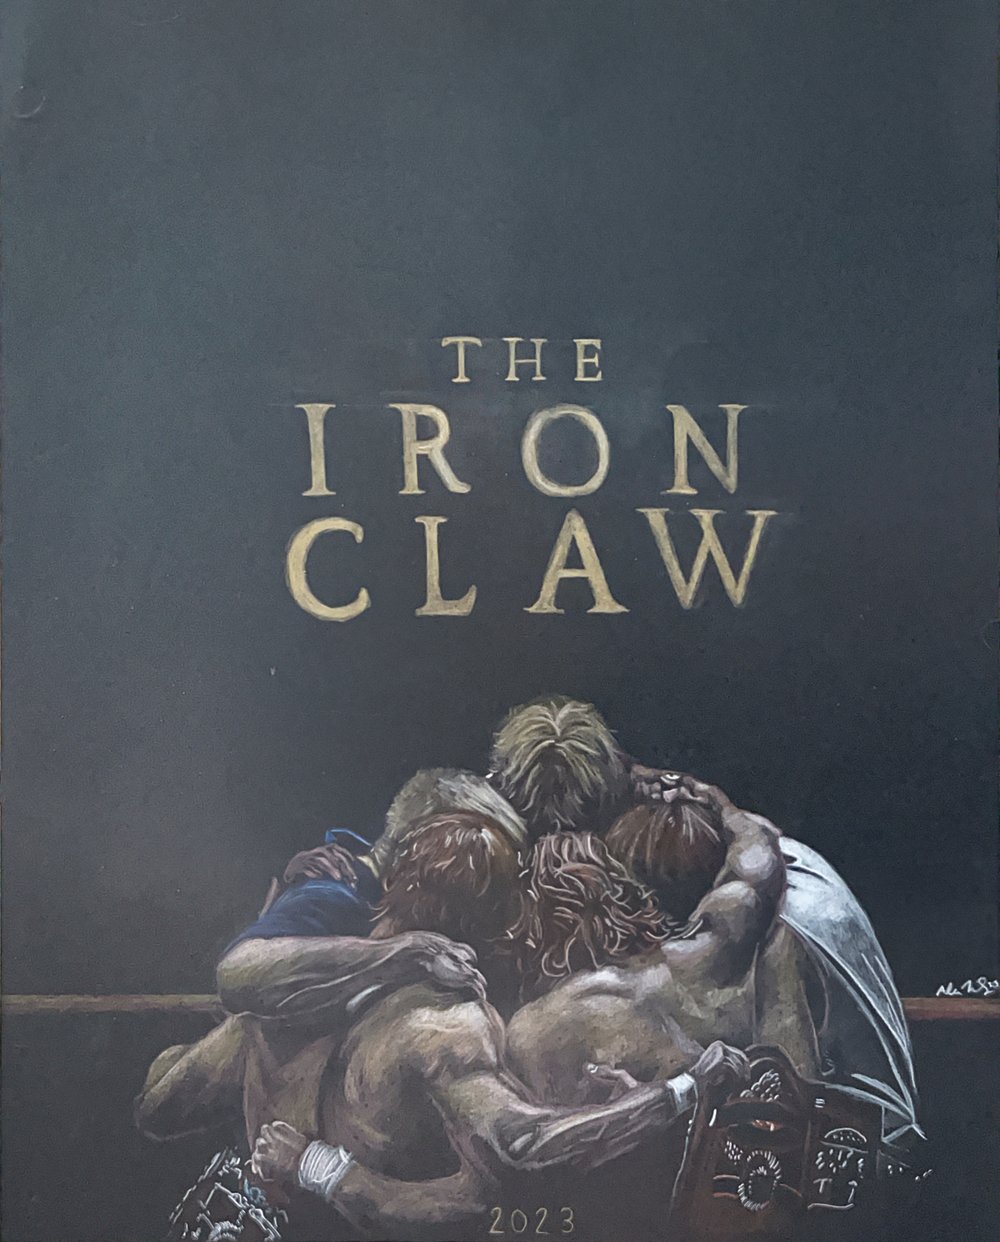 Image of “Being together, we can do anything.” THE IRON CLAW Art Print